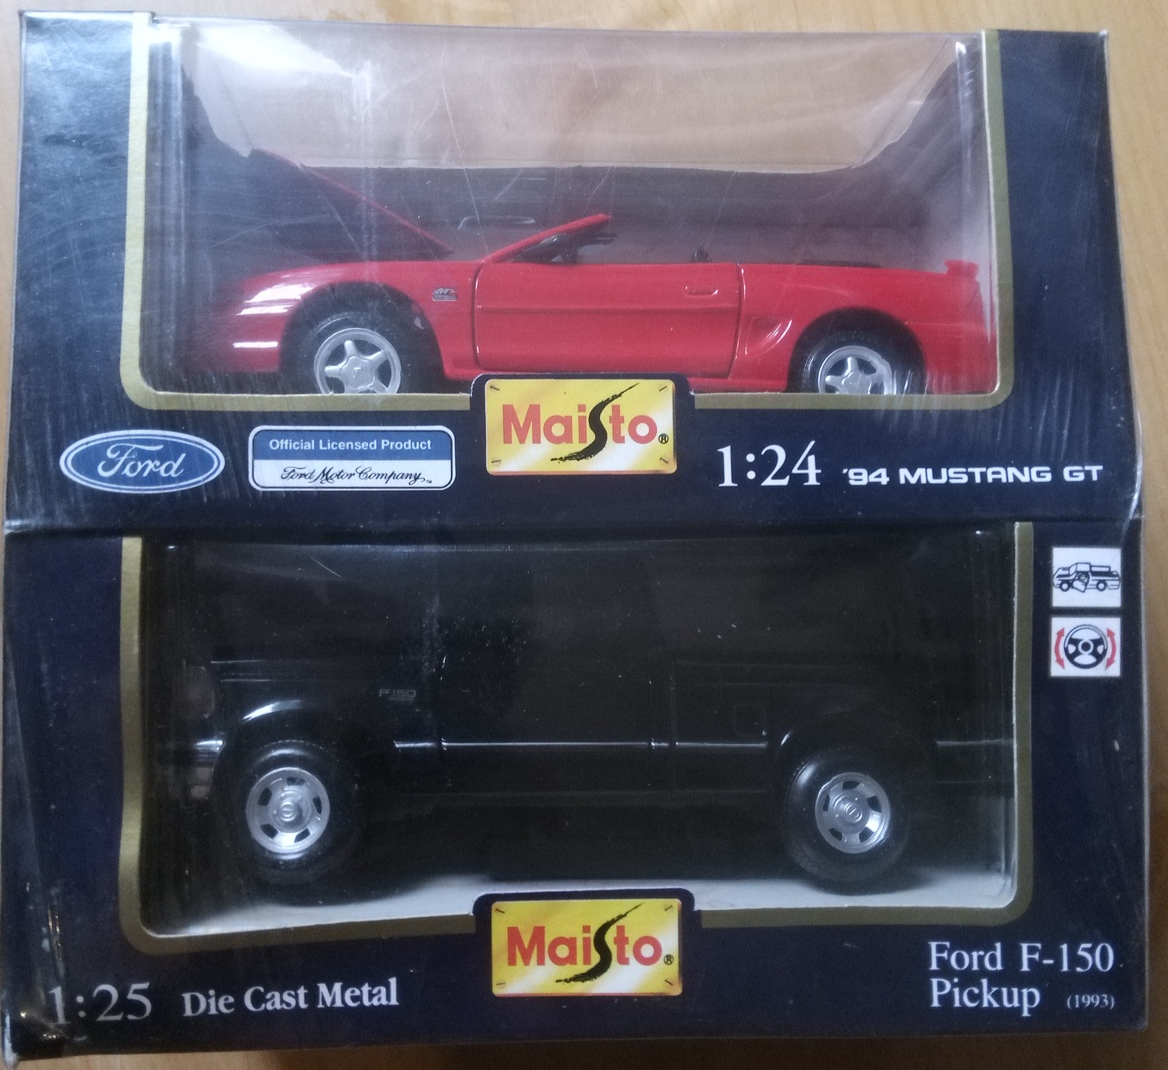 94 Mustang and 93 Ford F150 Maisto 1:24 Box Set - $29.99